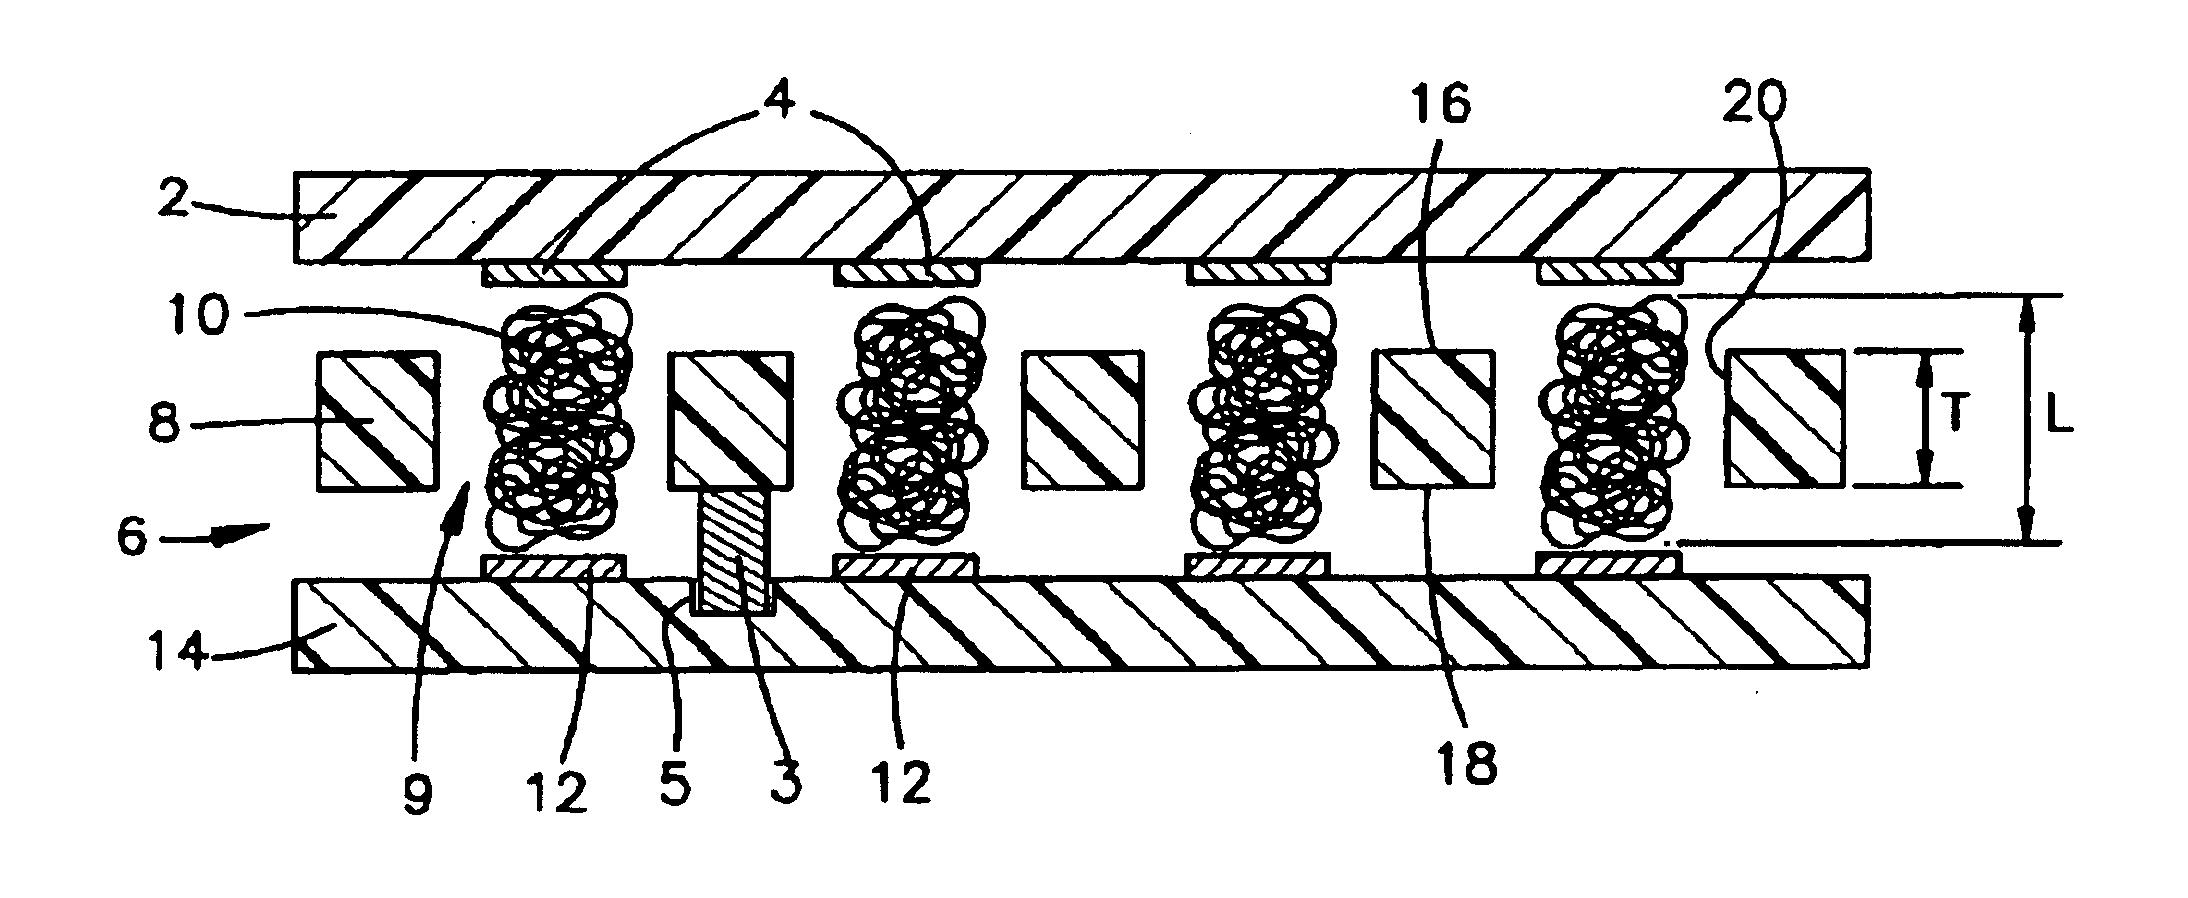 Enhanced electrical/mechanical connection for electronic devices